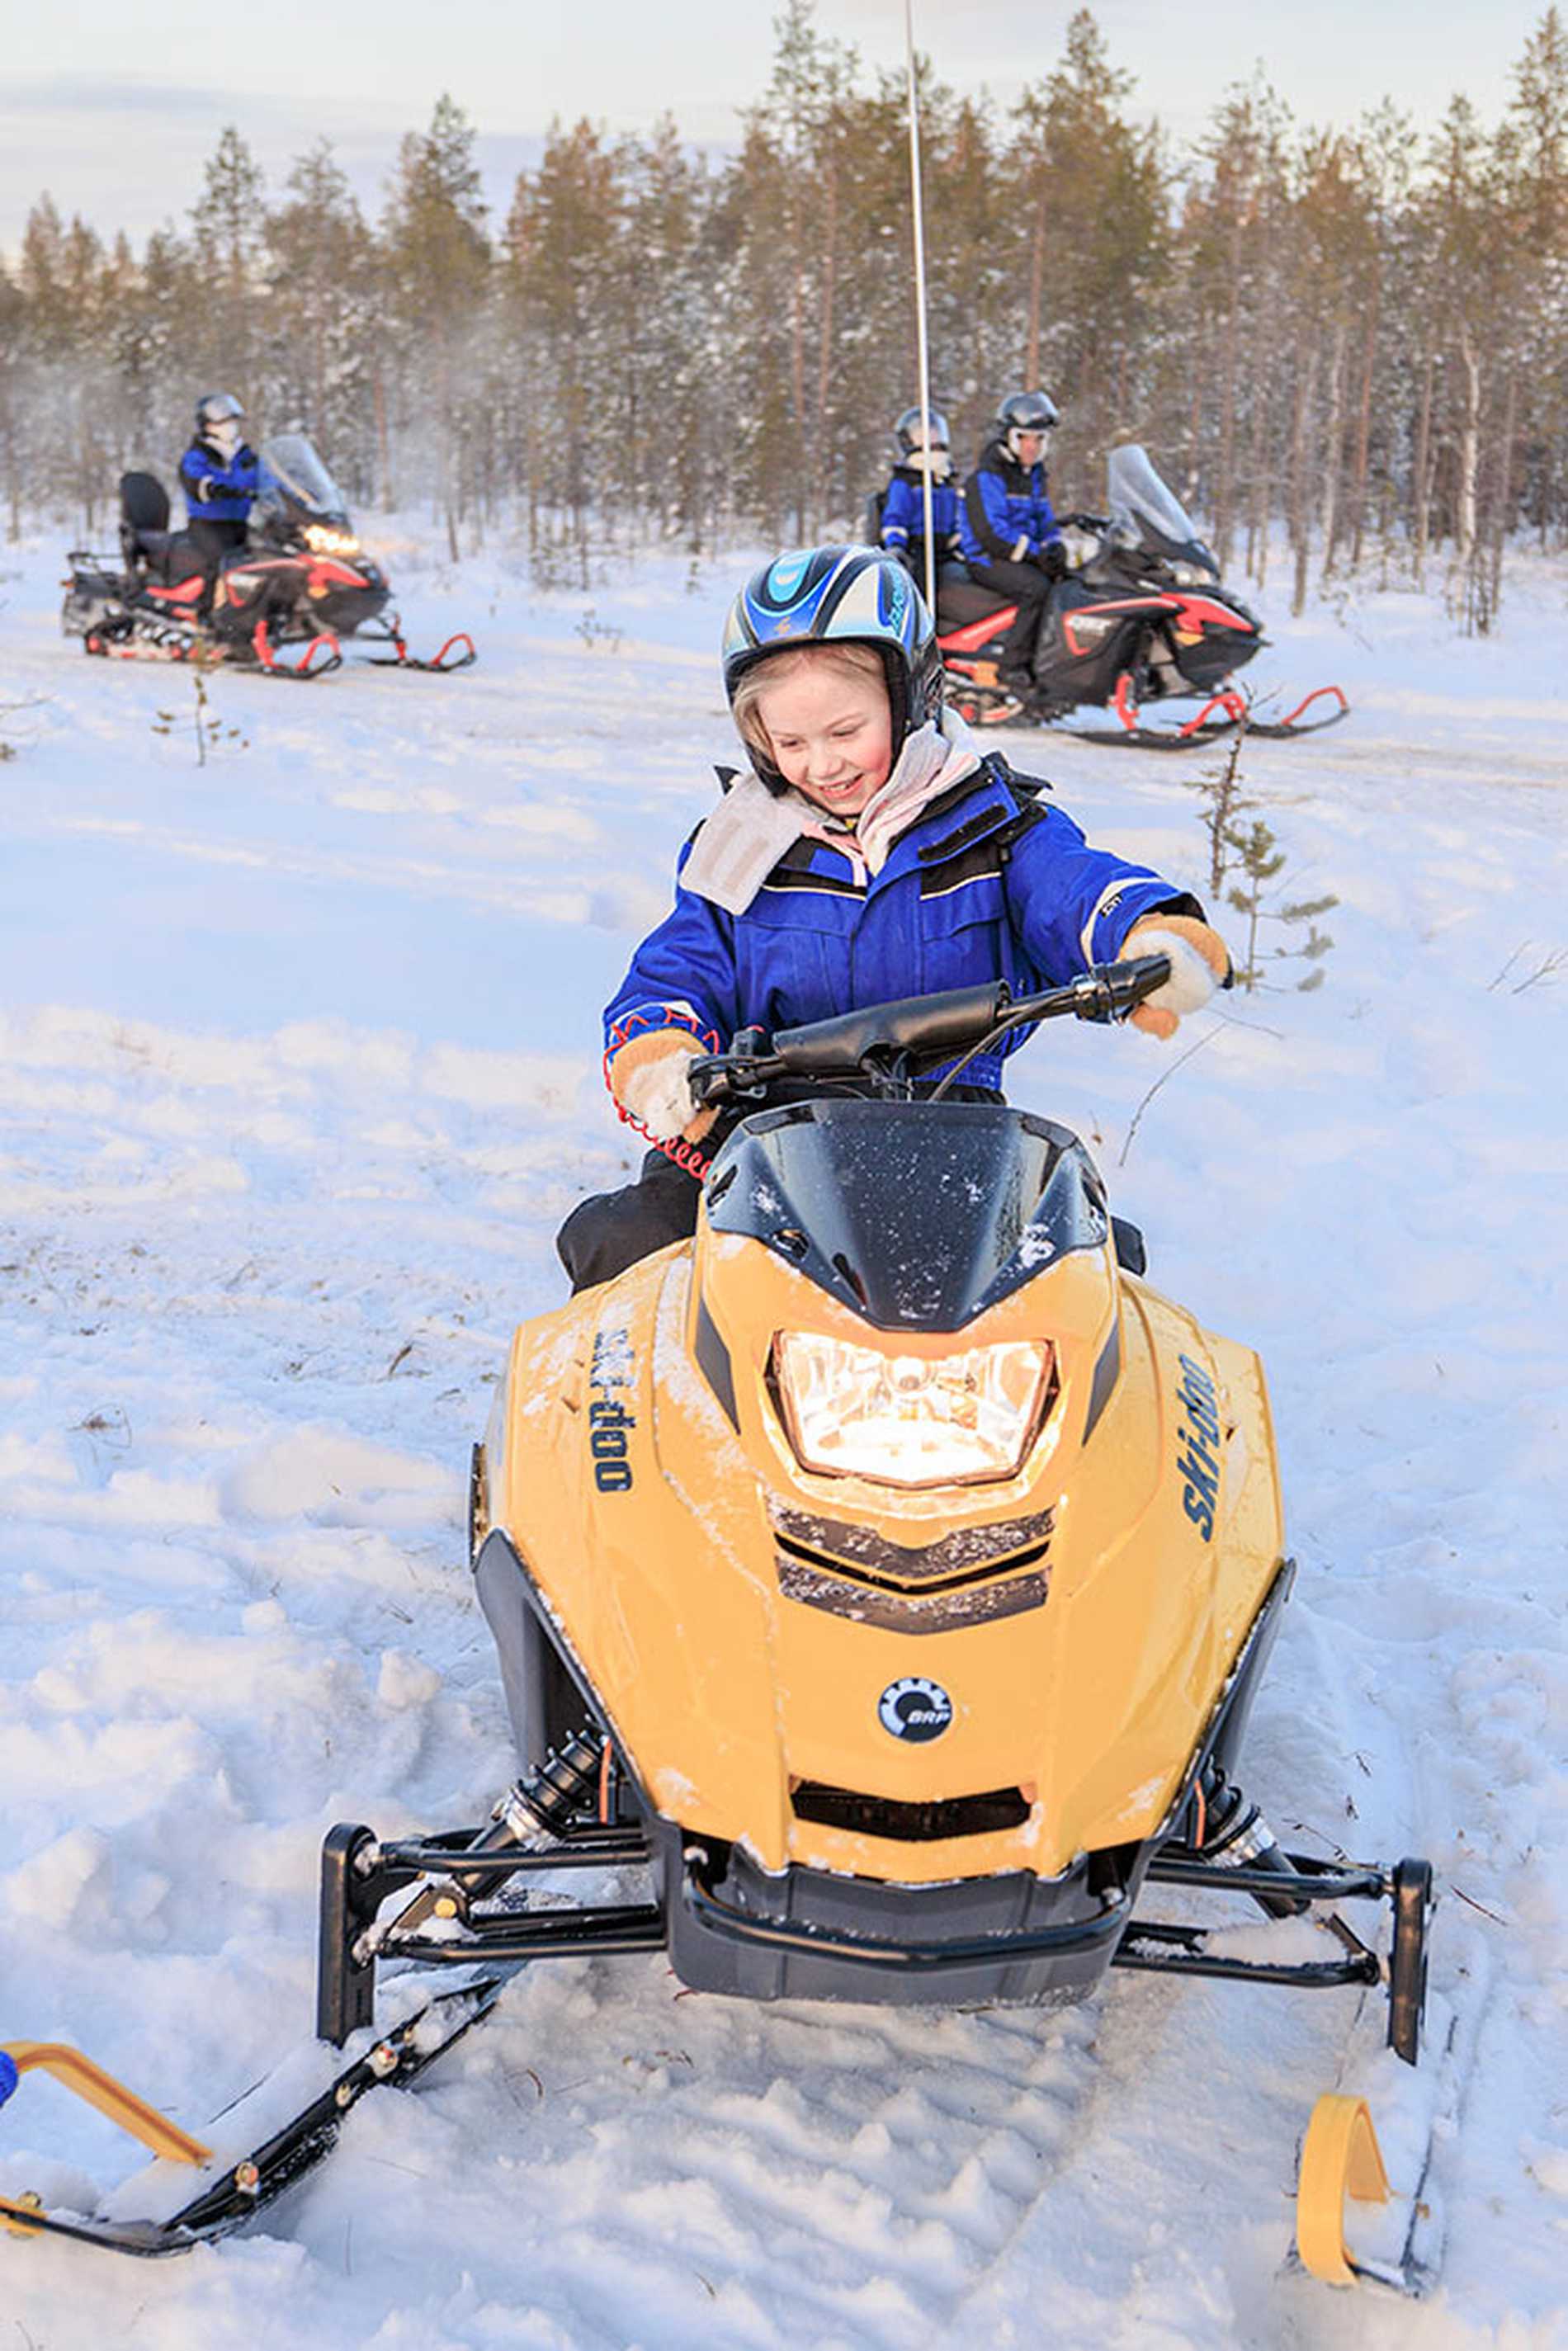 Alice riding a yellow snowmobile during her trip to Lapland.